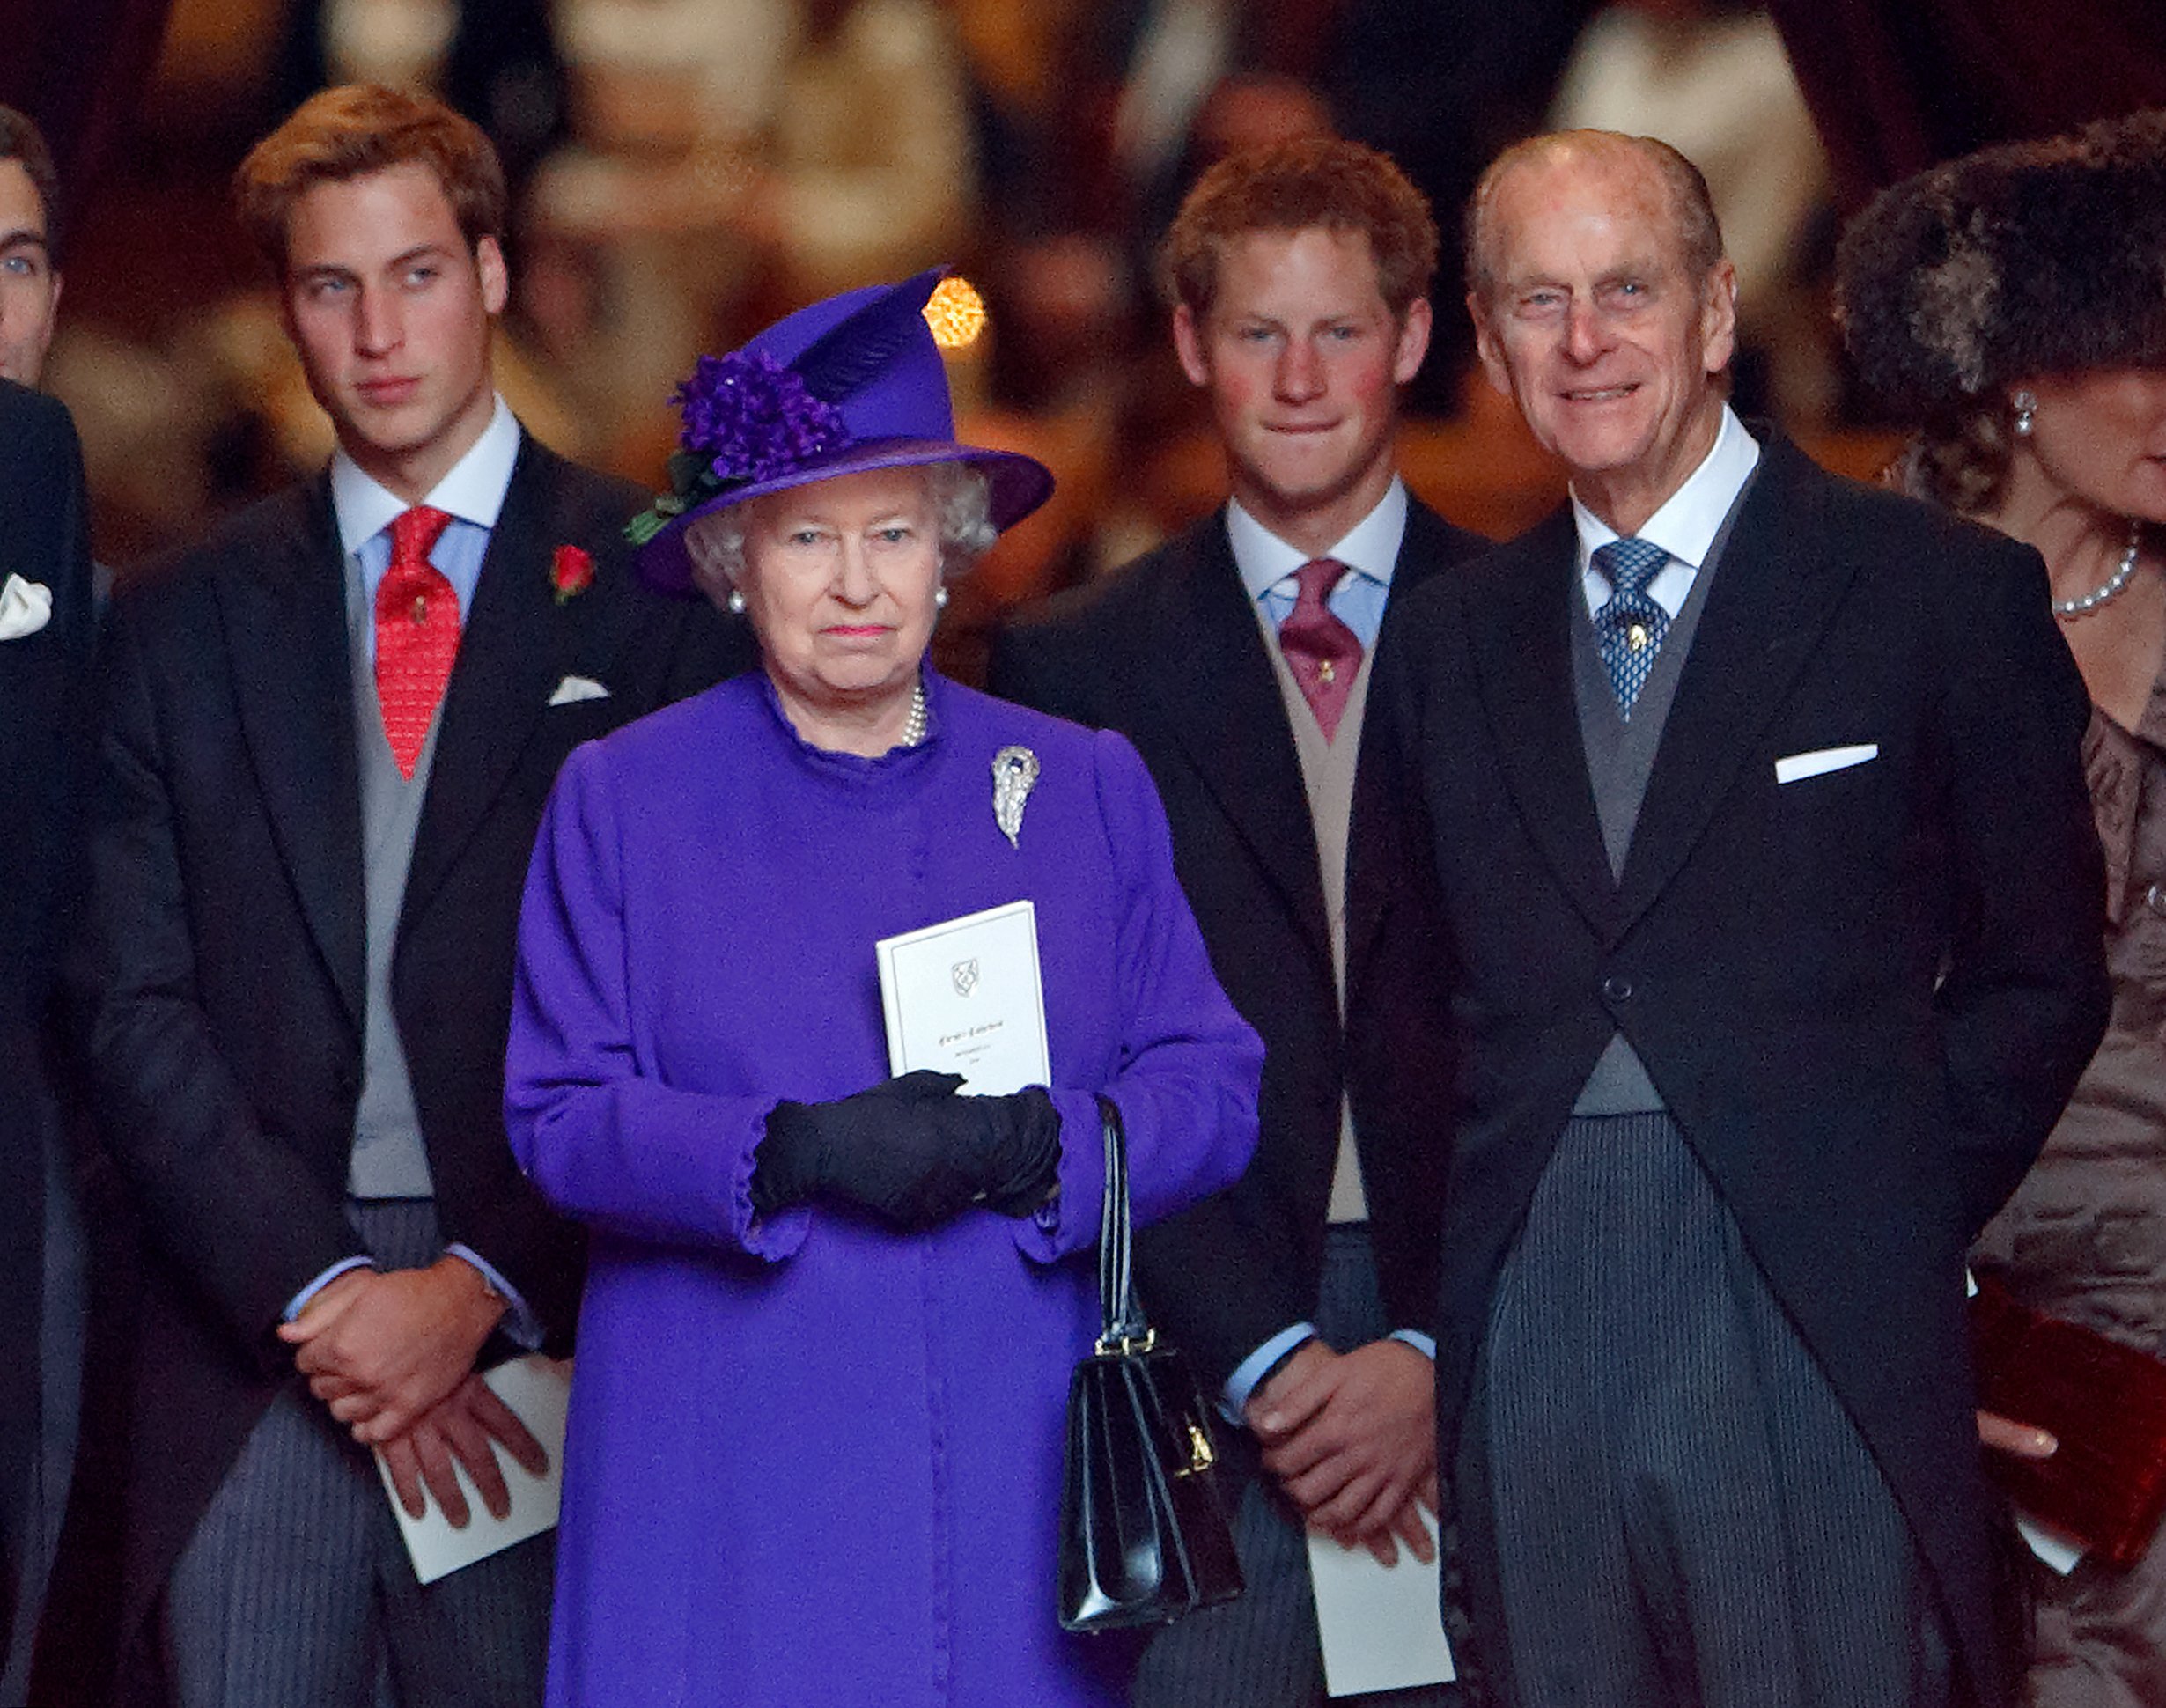 Prince William, Queen Elizabeth II, Prince Harry and Prince Philip, Duke of Edinburgh attend the wedding of Edward van Cutsem and Lady Tamara Grosvenor on November 6, 2004 in Chester, England. | Source: Getty Images 